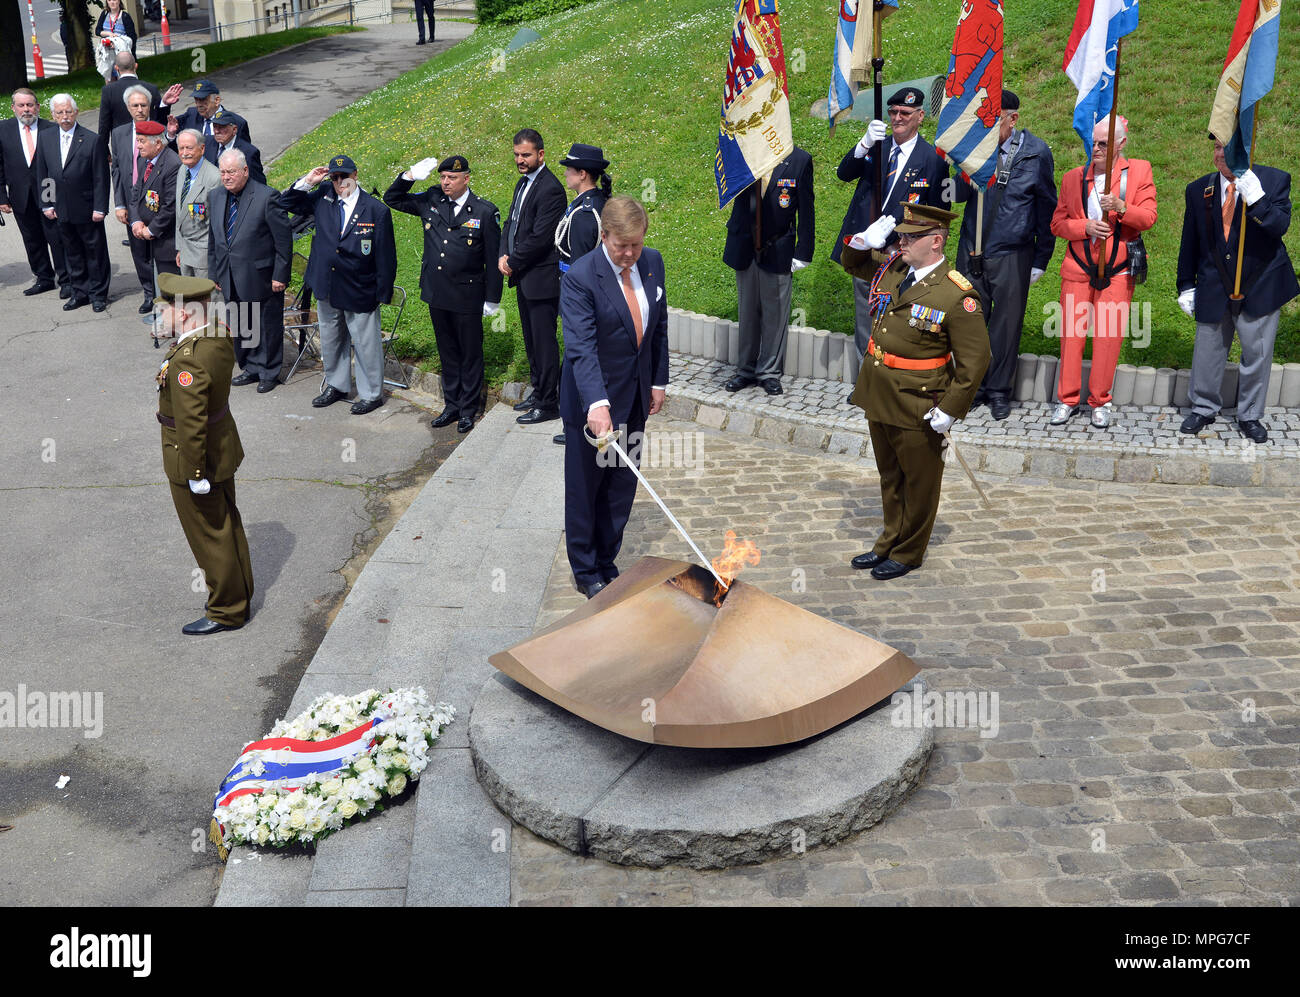 23 May 2018, Luxembourg, Luxembourg: Dutch King Willem-Alexander (c) holds a sword into the flames of the Monument de Solidarité. The Dutch King and Queen are in Luxembourg for a three-day state visit. Photo: Harald Tittel/dpa Stock Photo